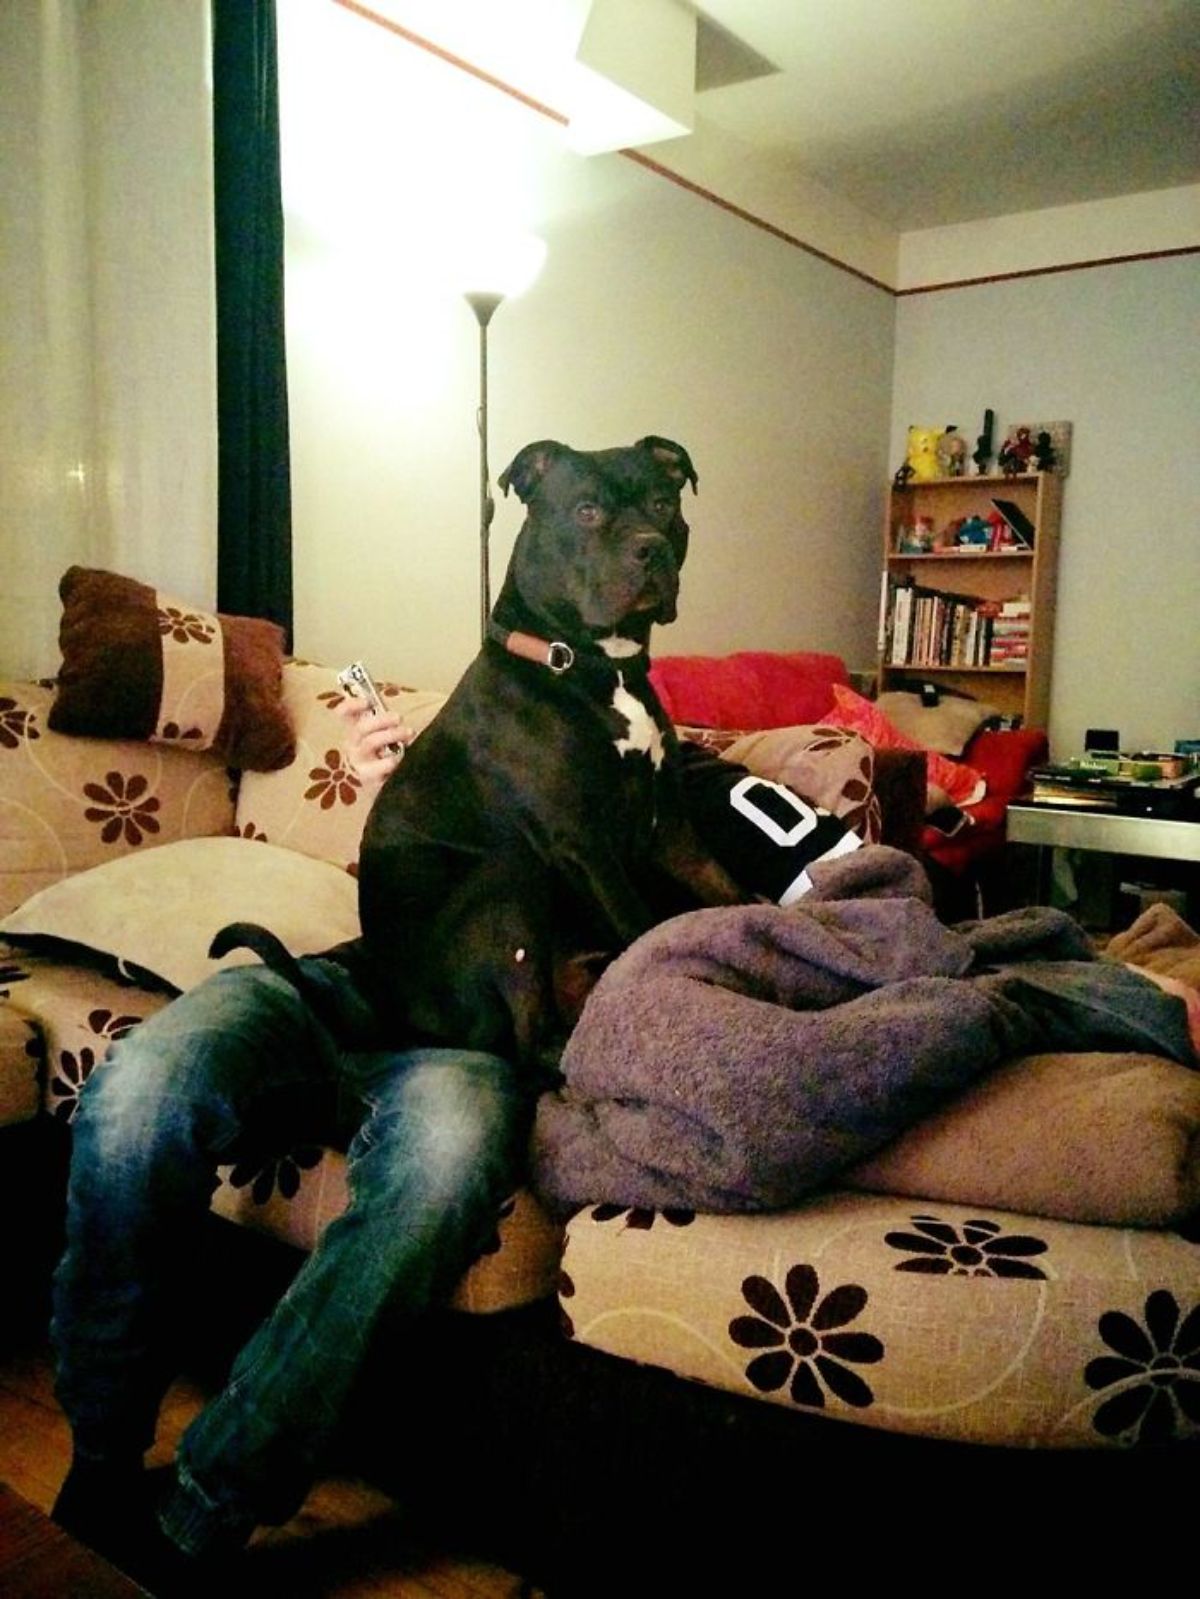 large black dog with white chest patch sitting on someone's lap